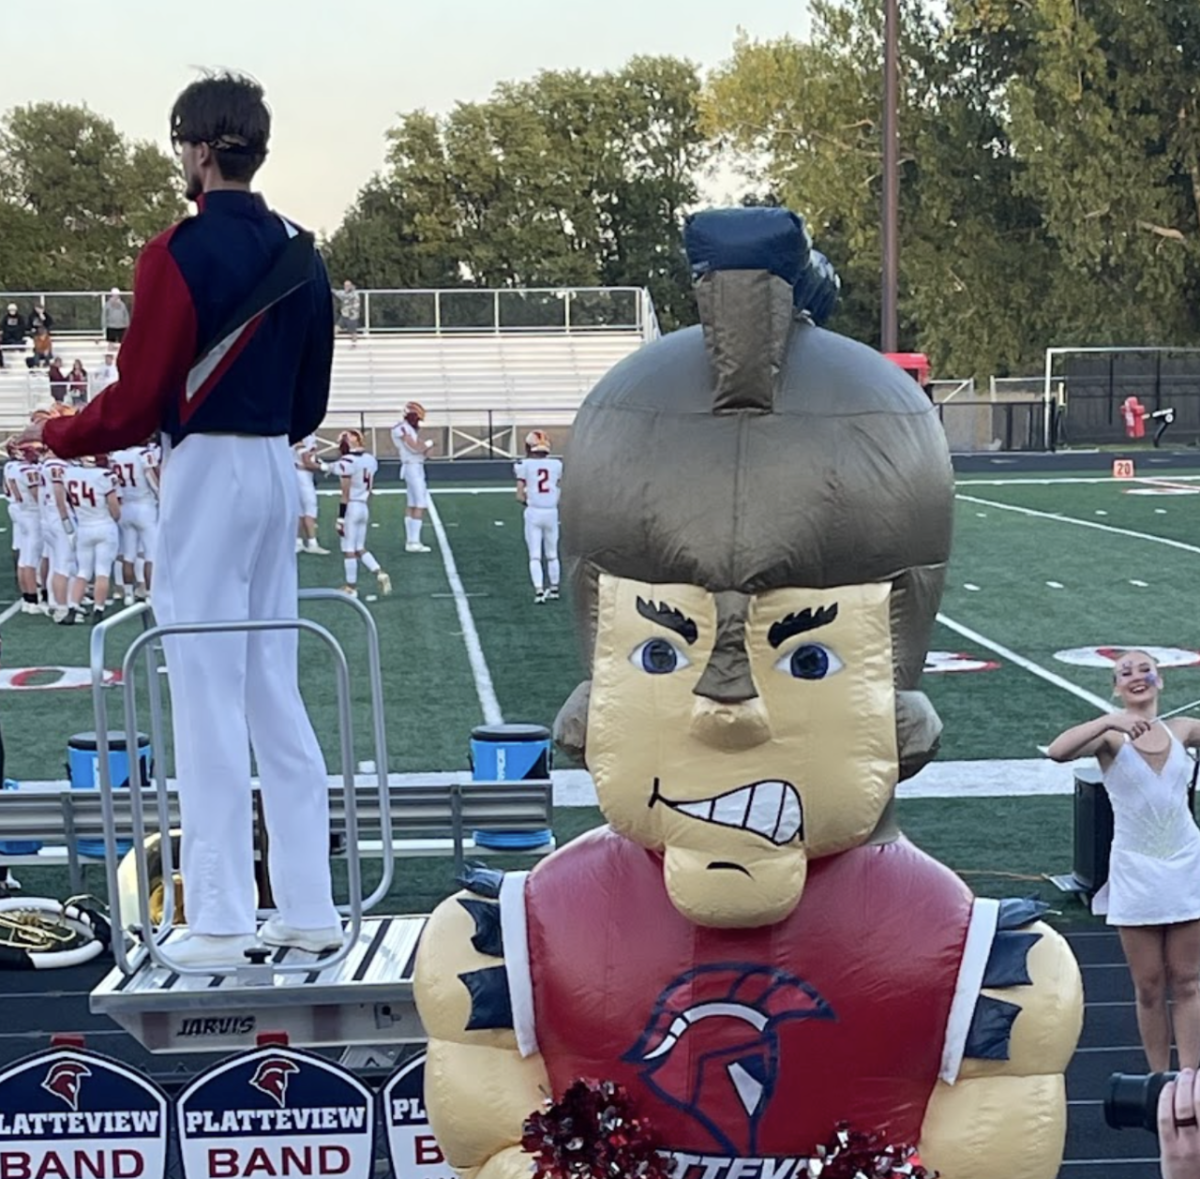 Terry the Trojan leads the audience in school spirit at a home football game.